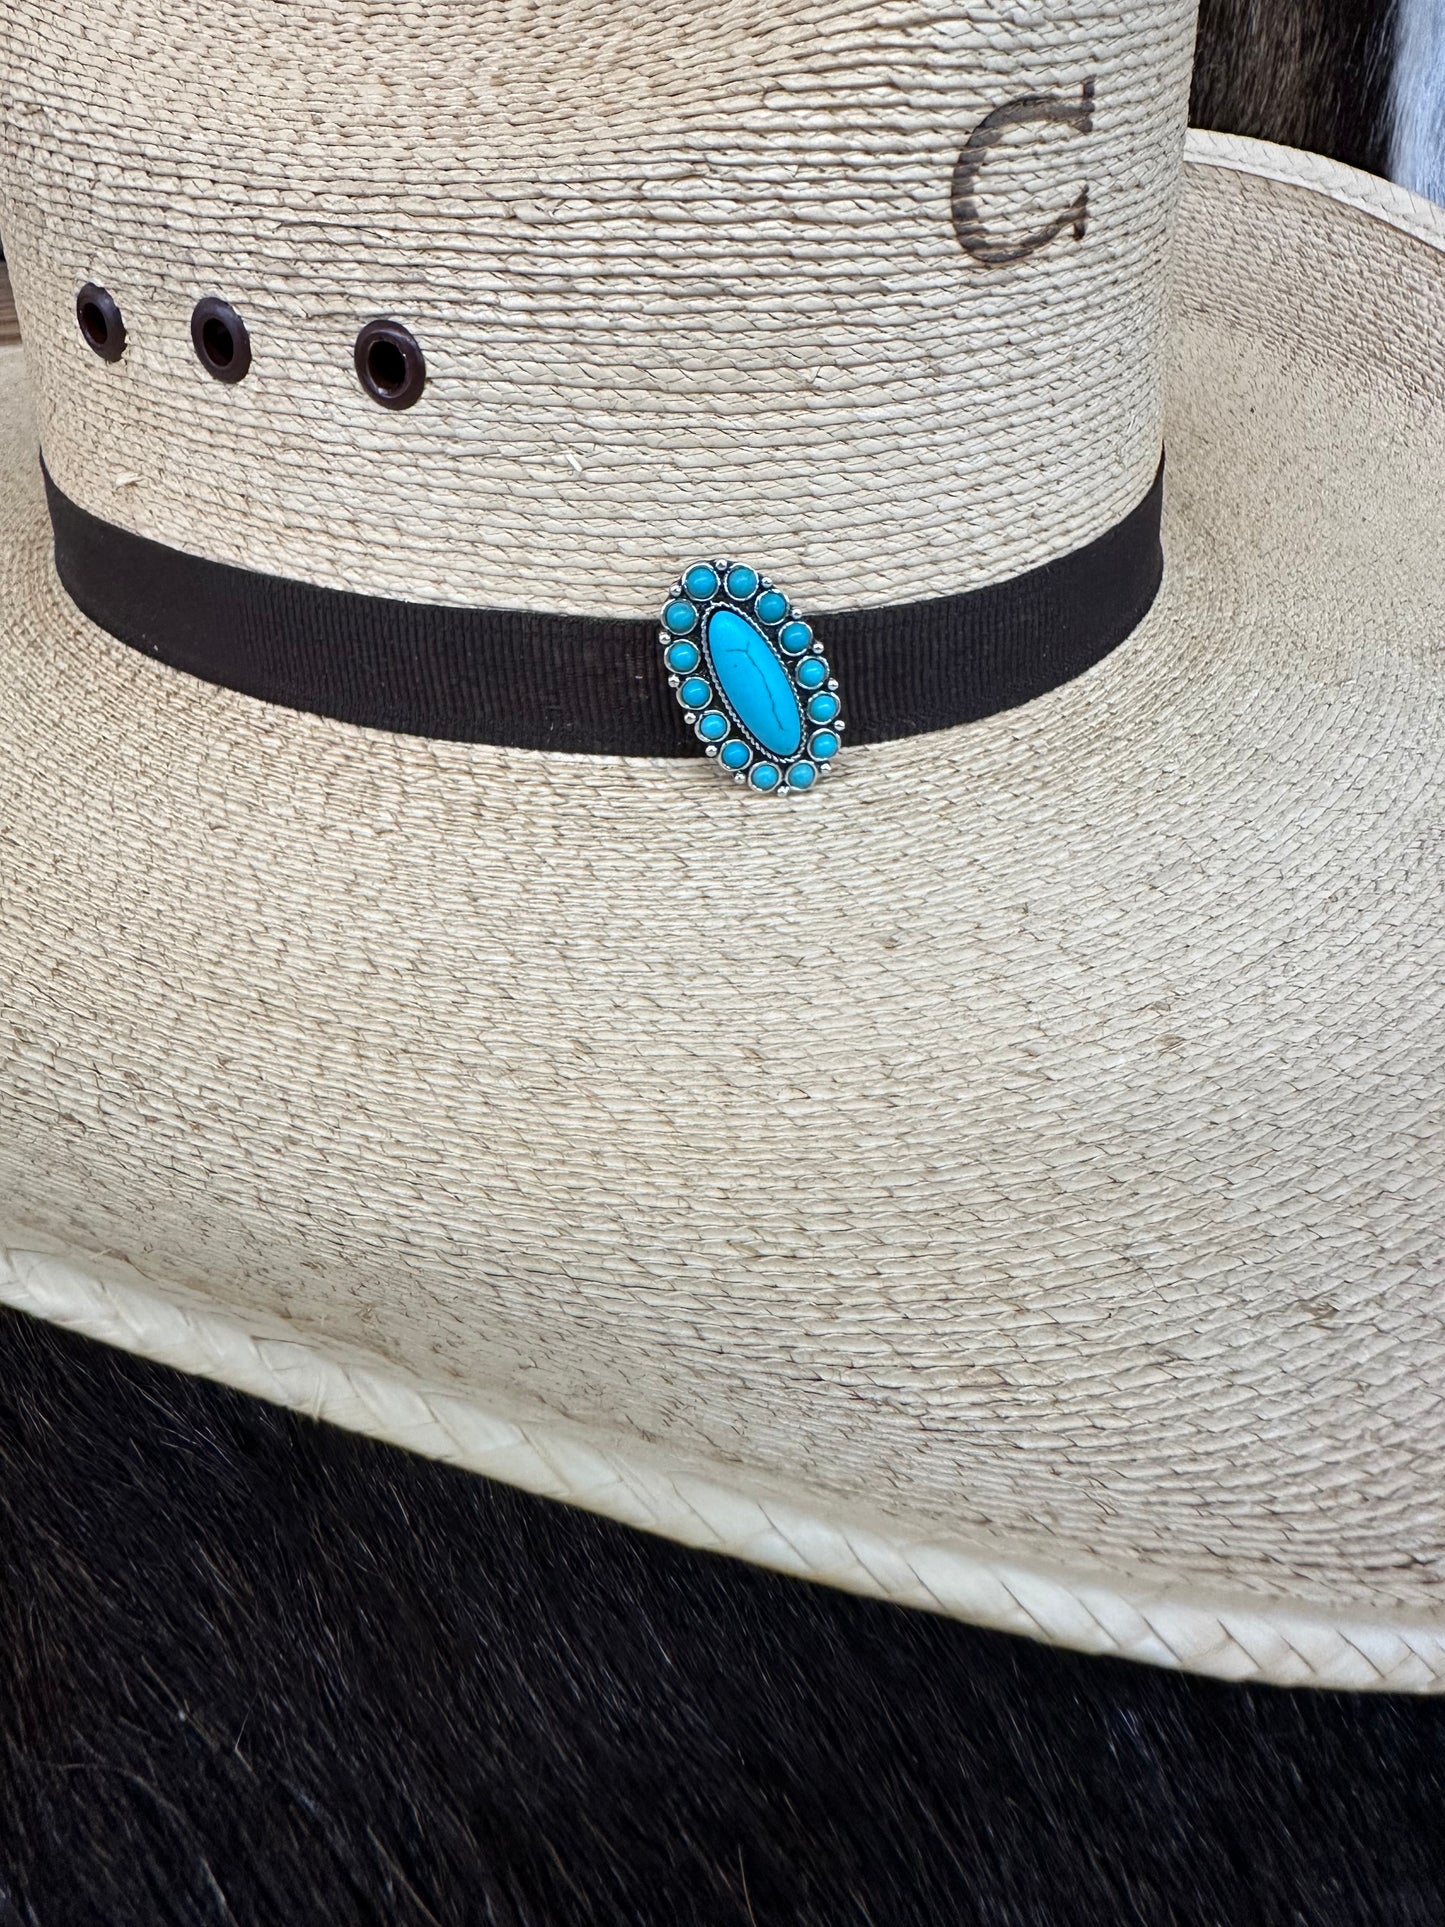 The Turquoise Feeds My Soul Hat Pin